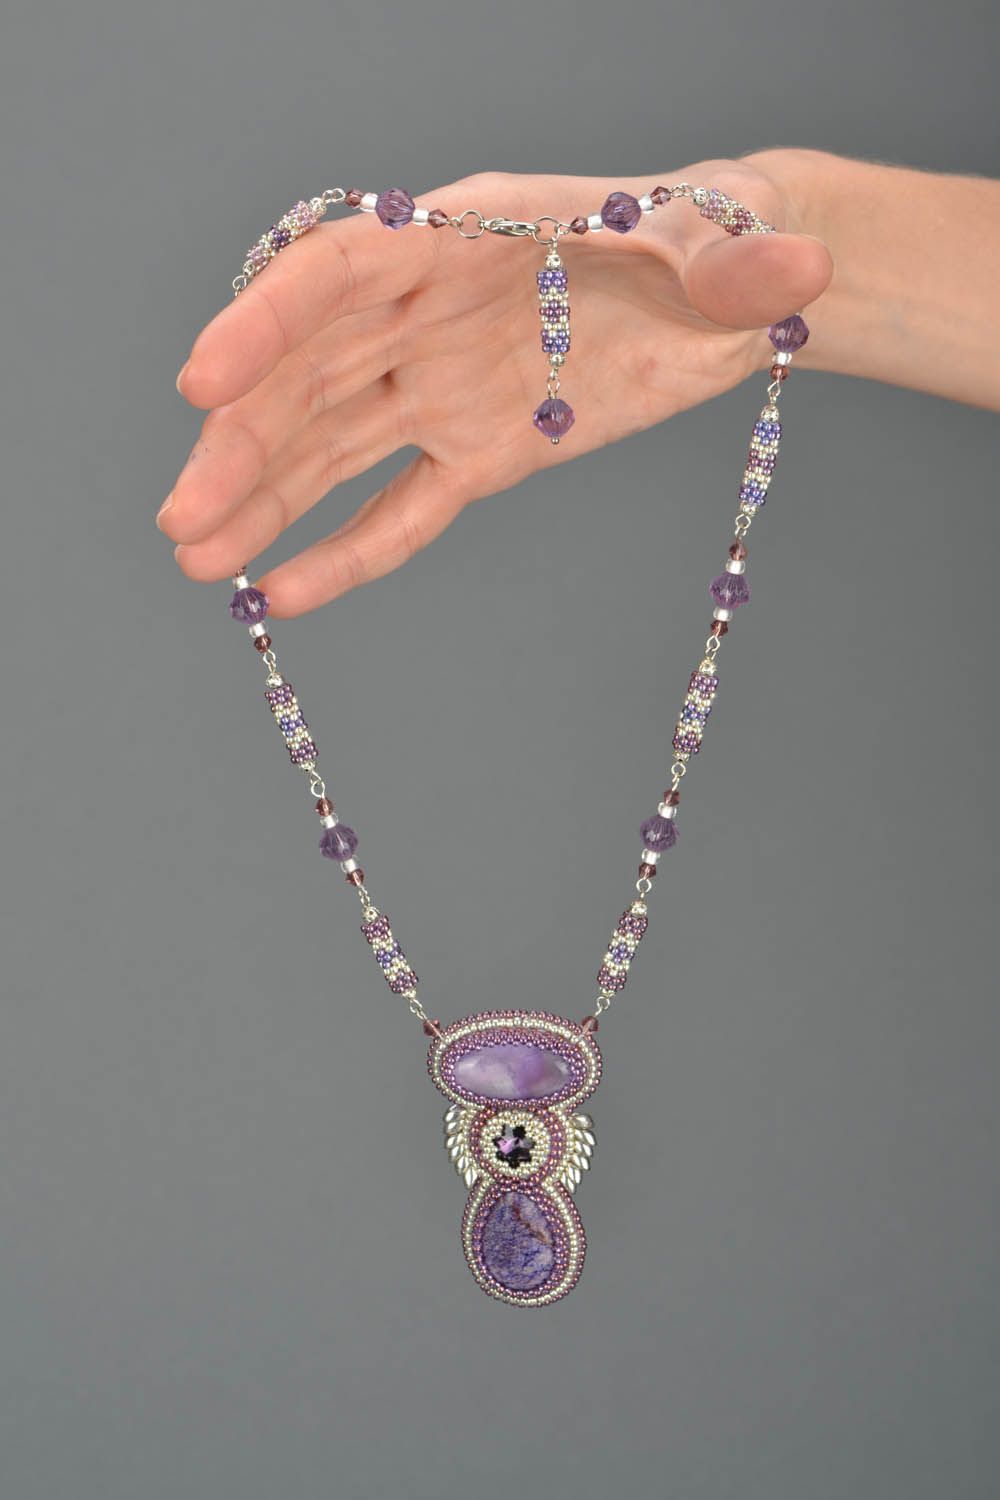 Necklet made of beads and natural stones photo 2